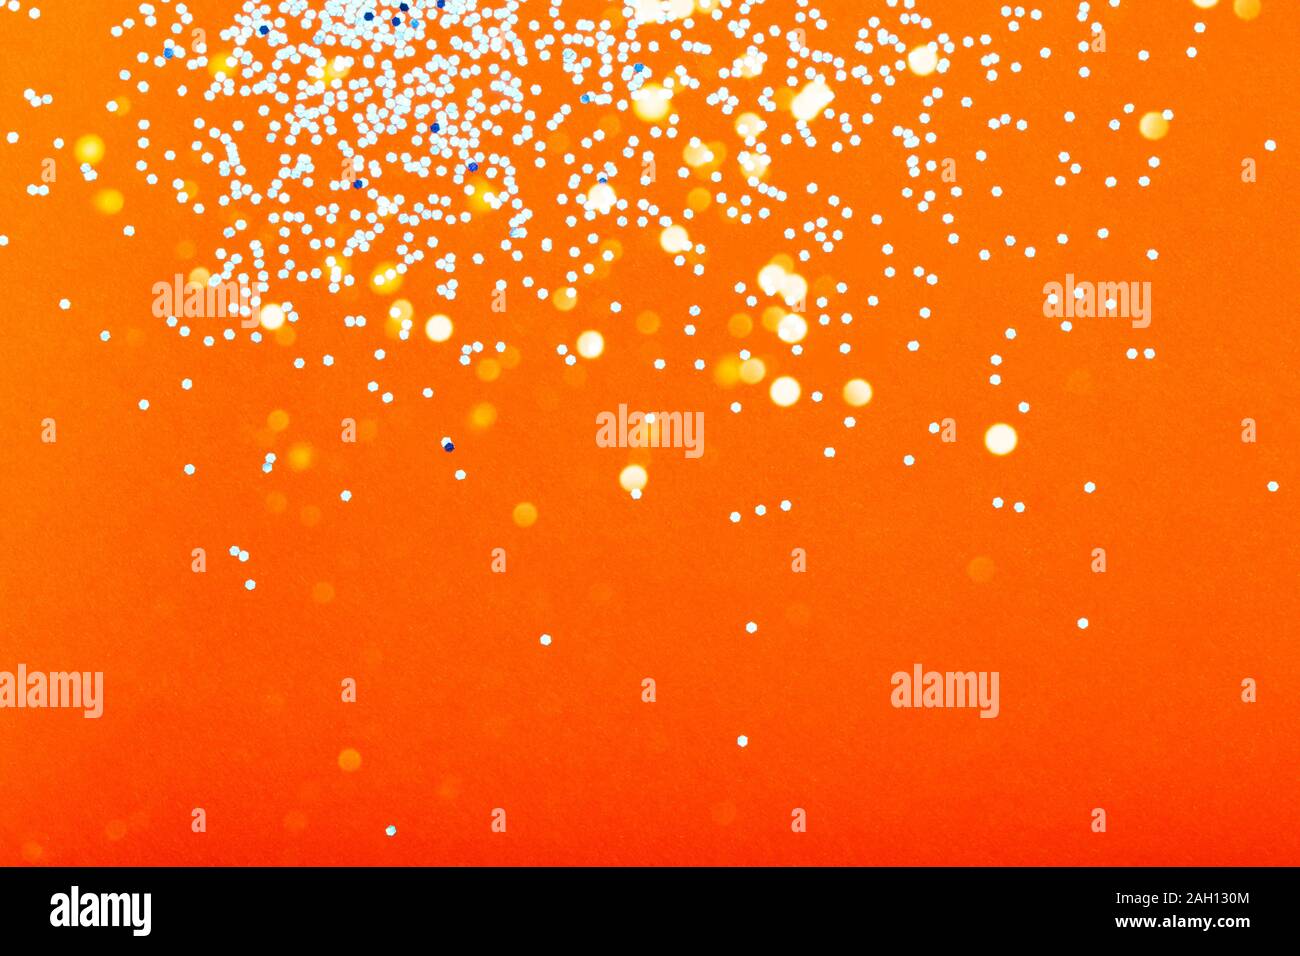 Orange festive background with blue sparkles. The concept of the celebration, the day of St. Valentine, New Year, birthdays, ceremonies, events, etc. Stock Photo